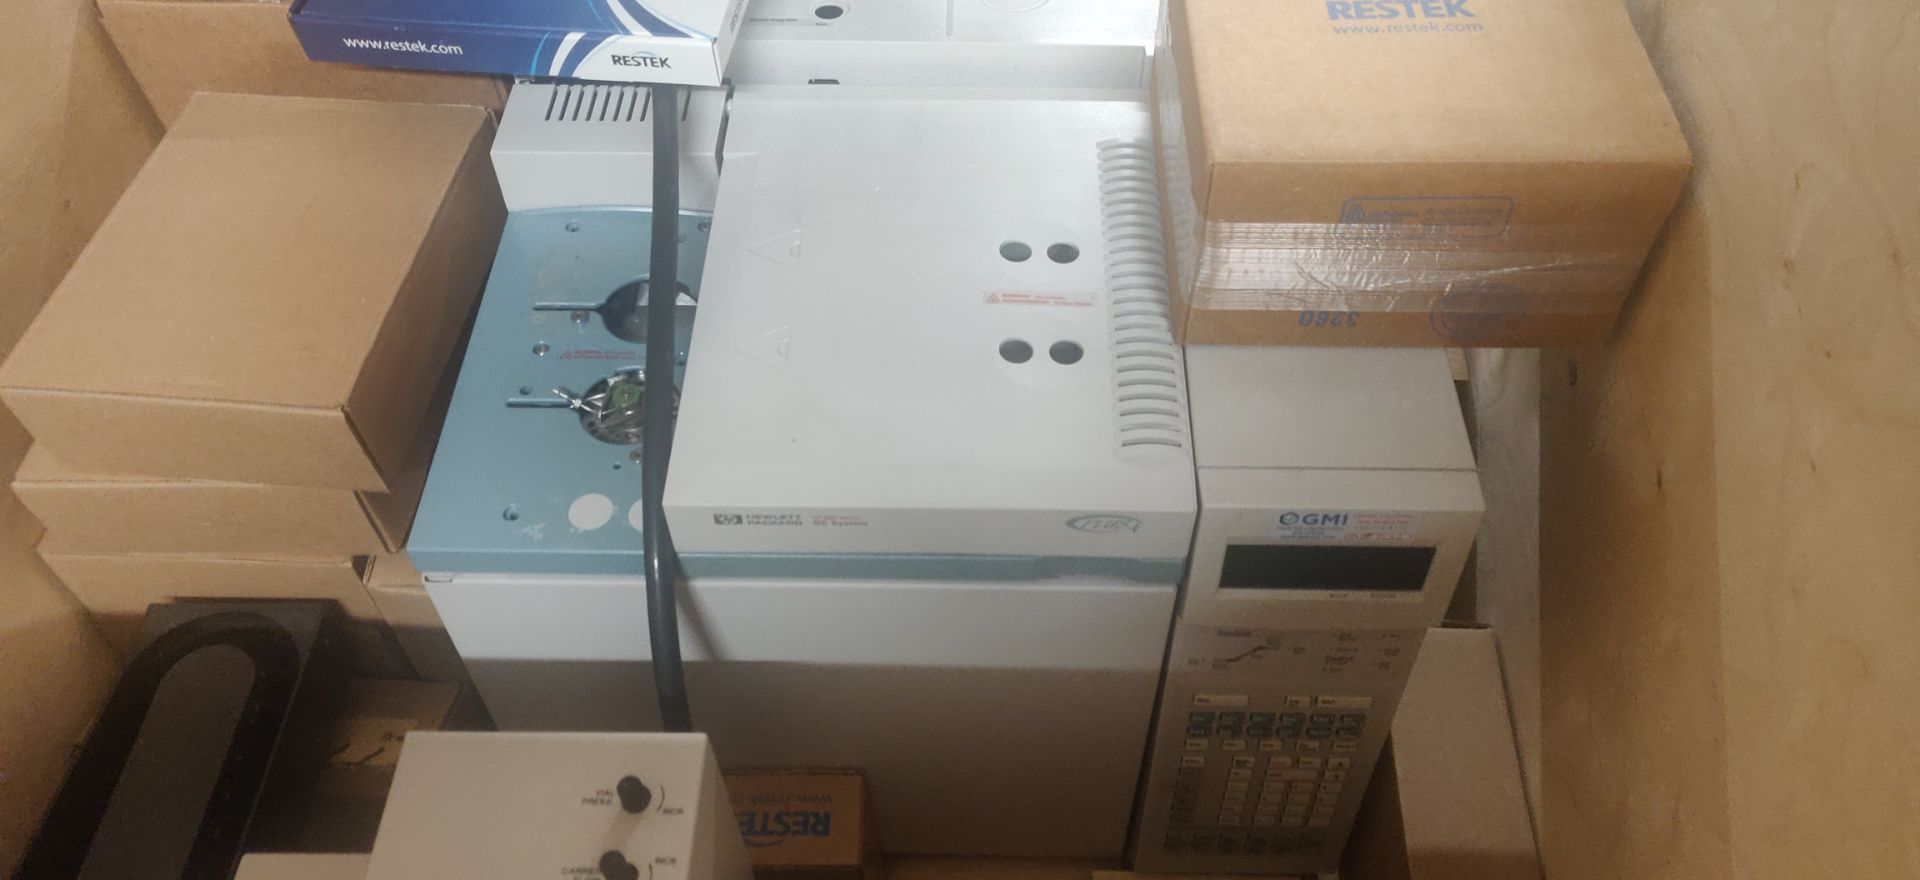 Used HP & Agilent Gas Chromatography Equipment with Restek Accessories. - Image 9 of 10